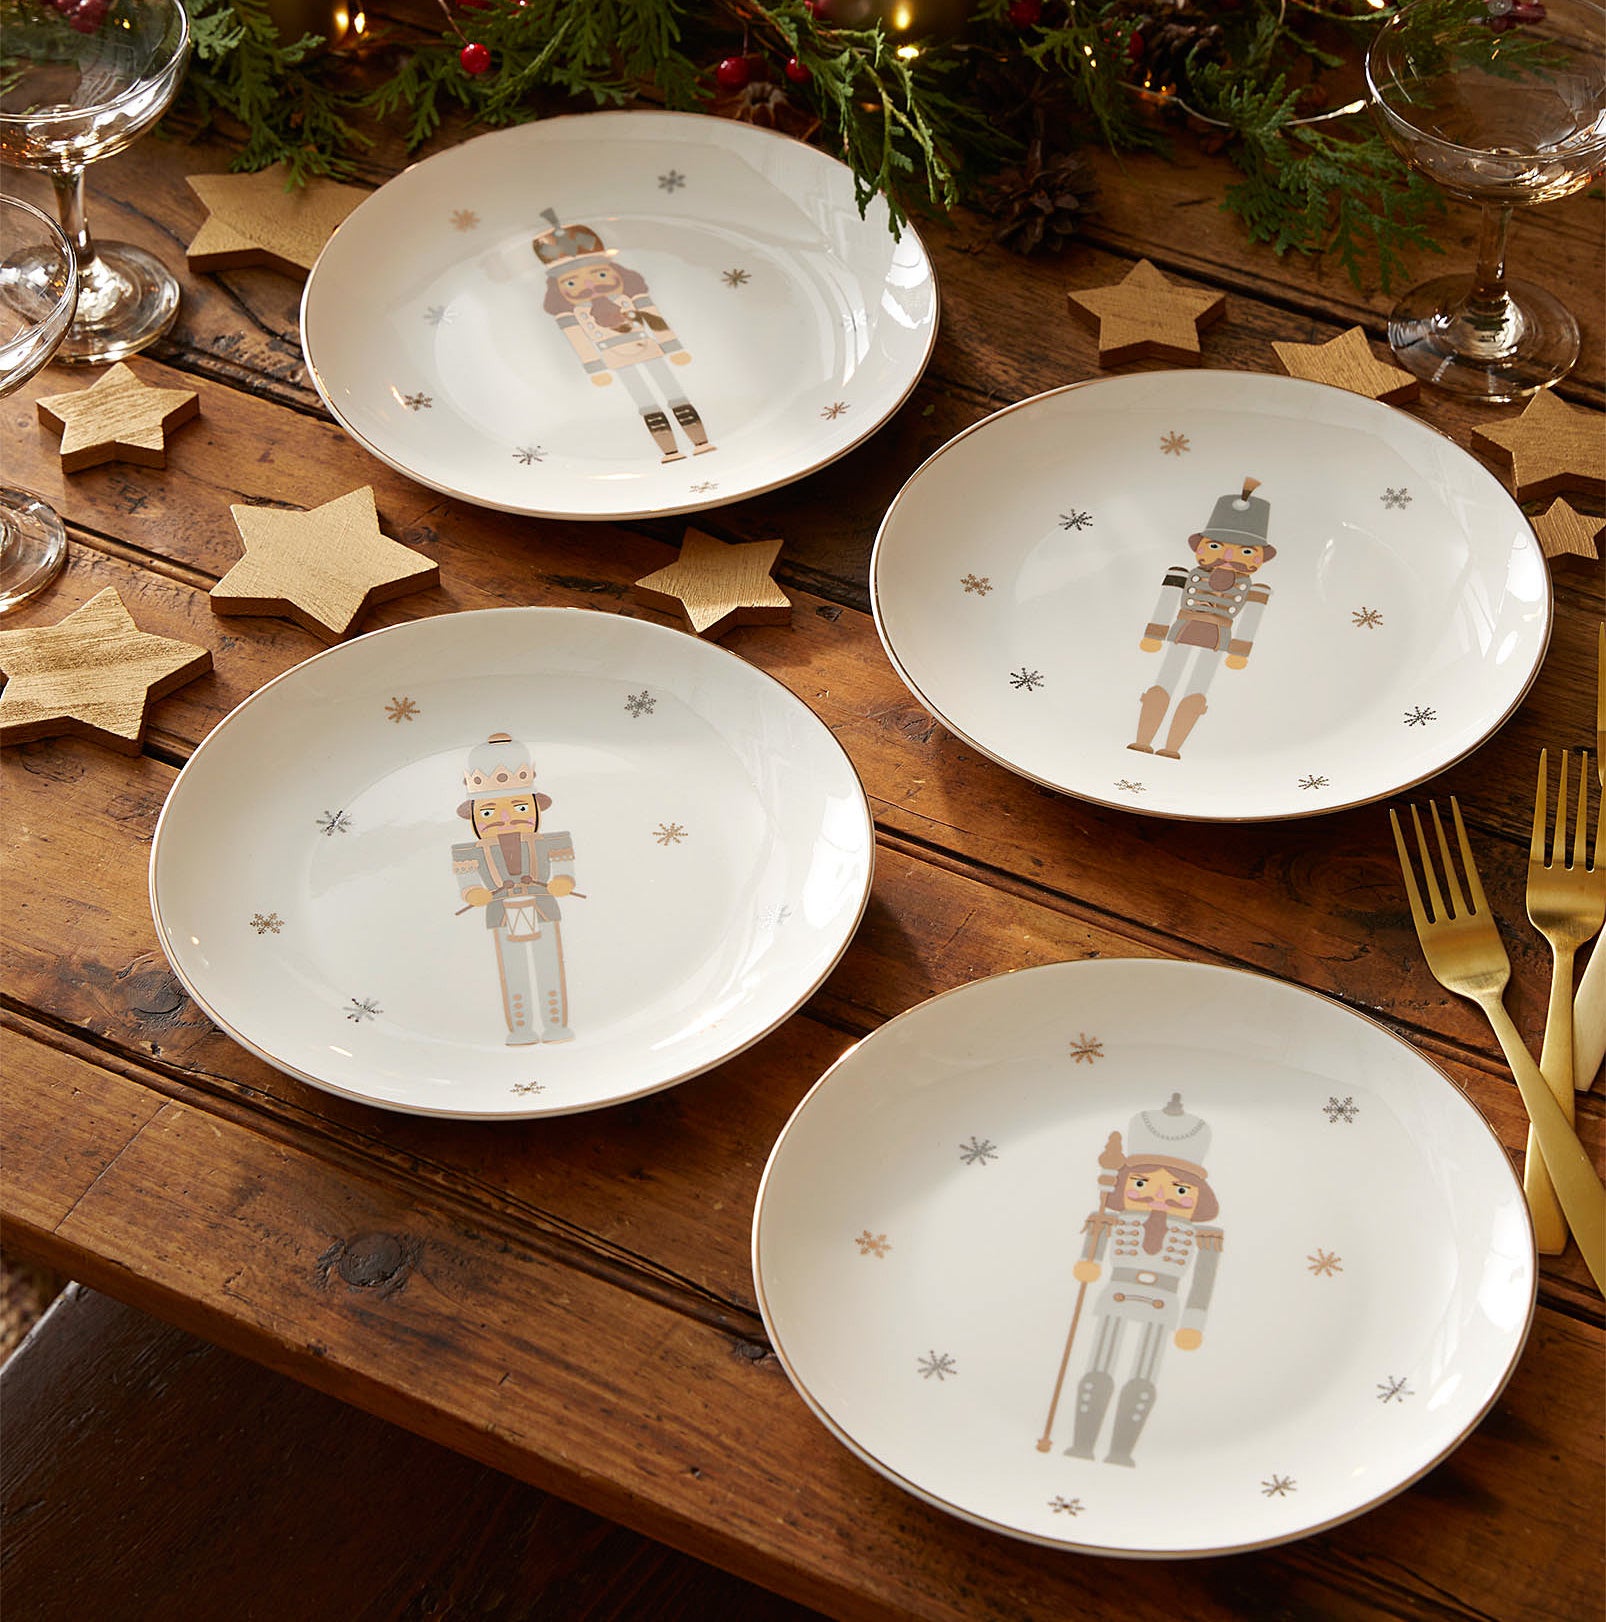 the plates on a decorated table